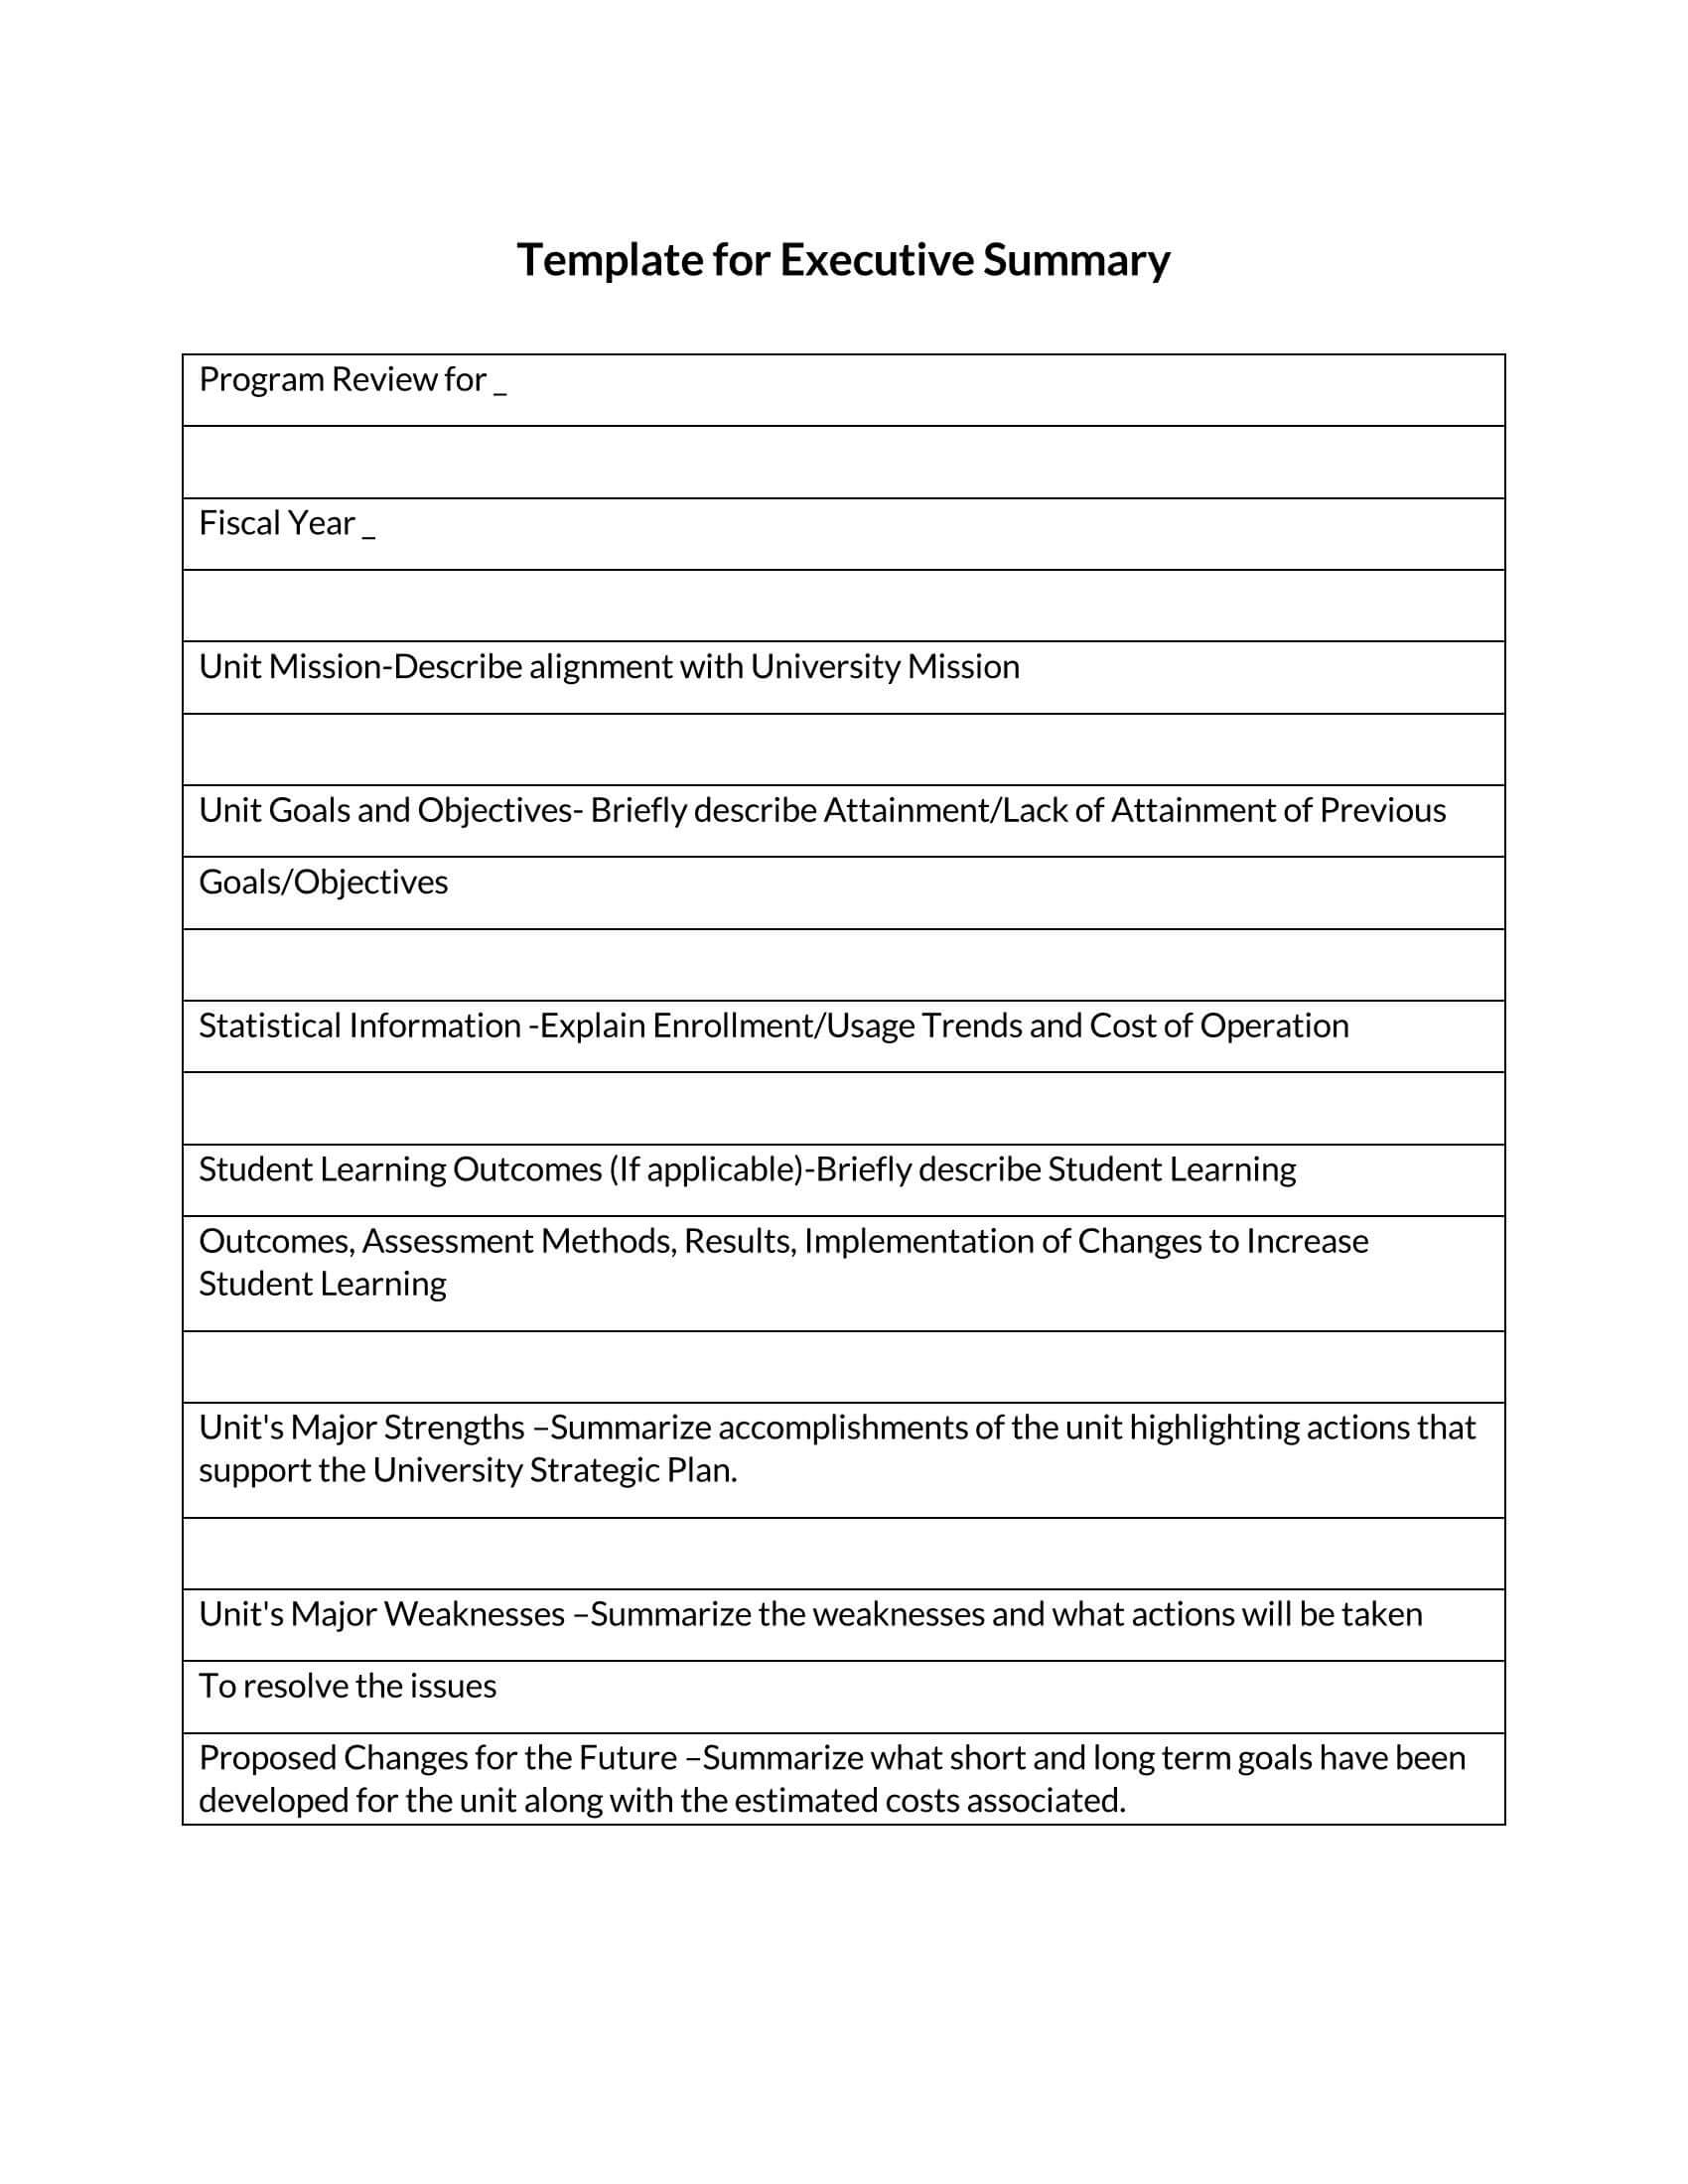 one page executive summary example